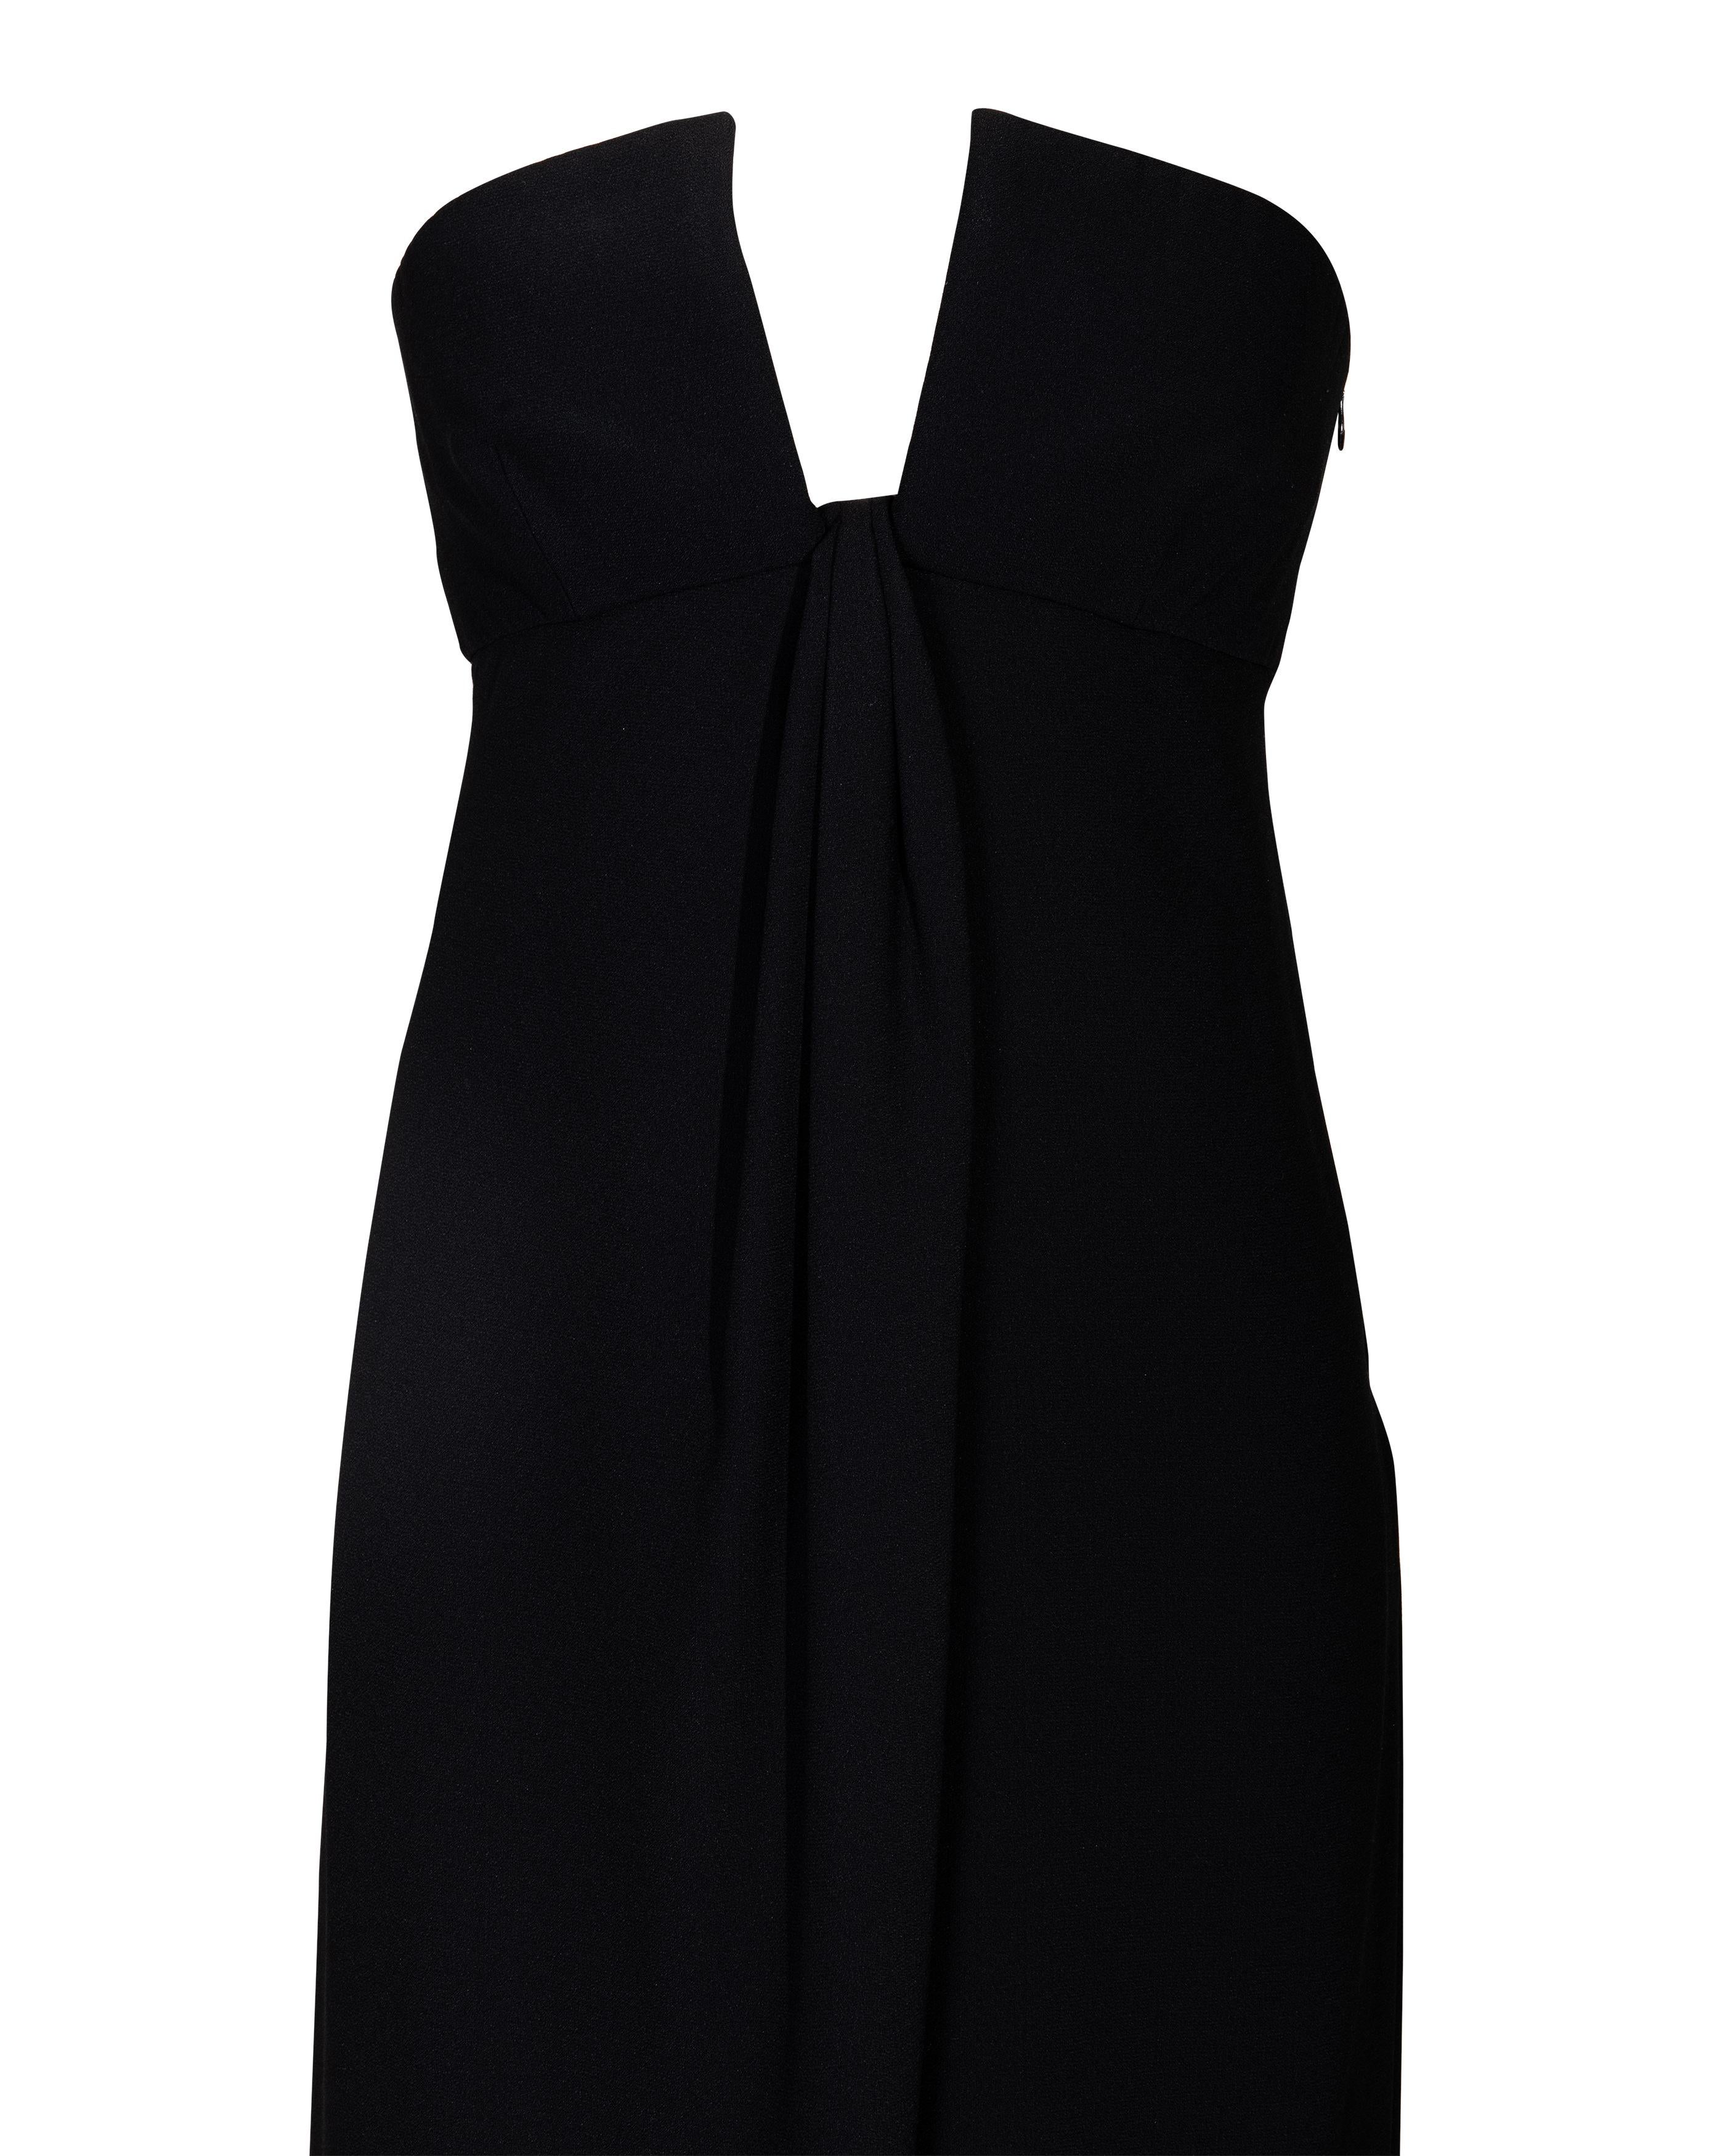 S/S 2000 Valentino Black Strapless Gown with Open Bust For Sale 6